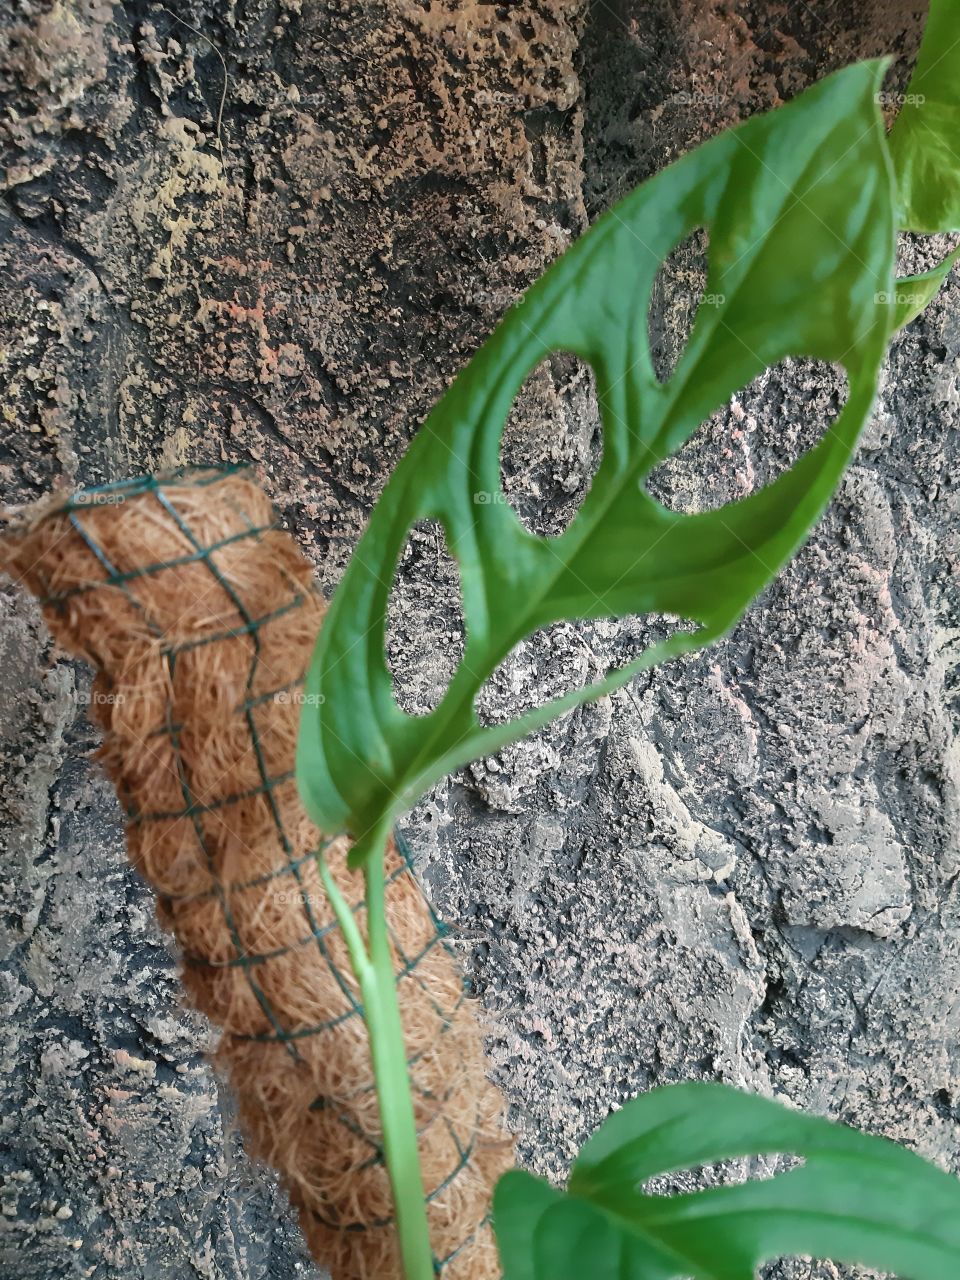 The leaf of monstera adansonii or also known as "Janda Bolong" in Indonesia